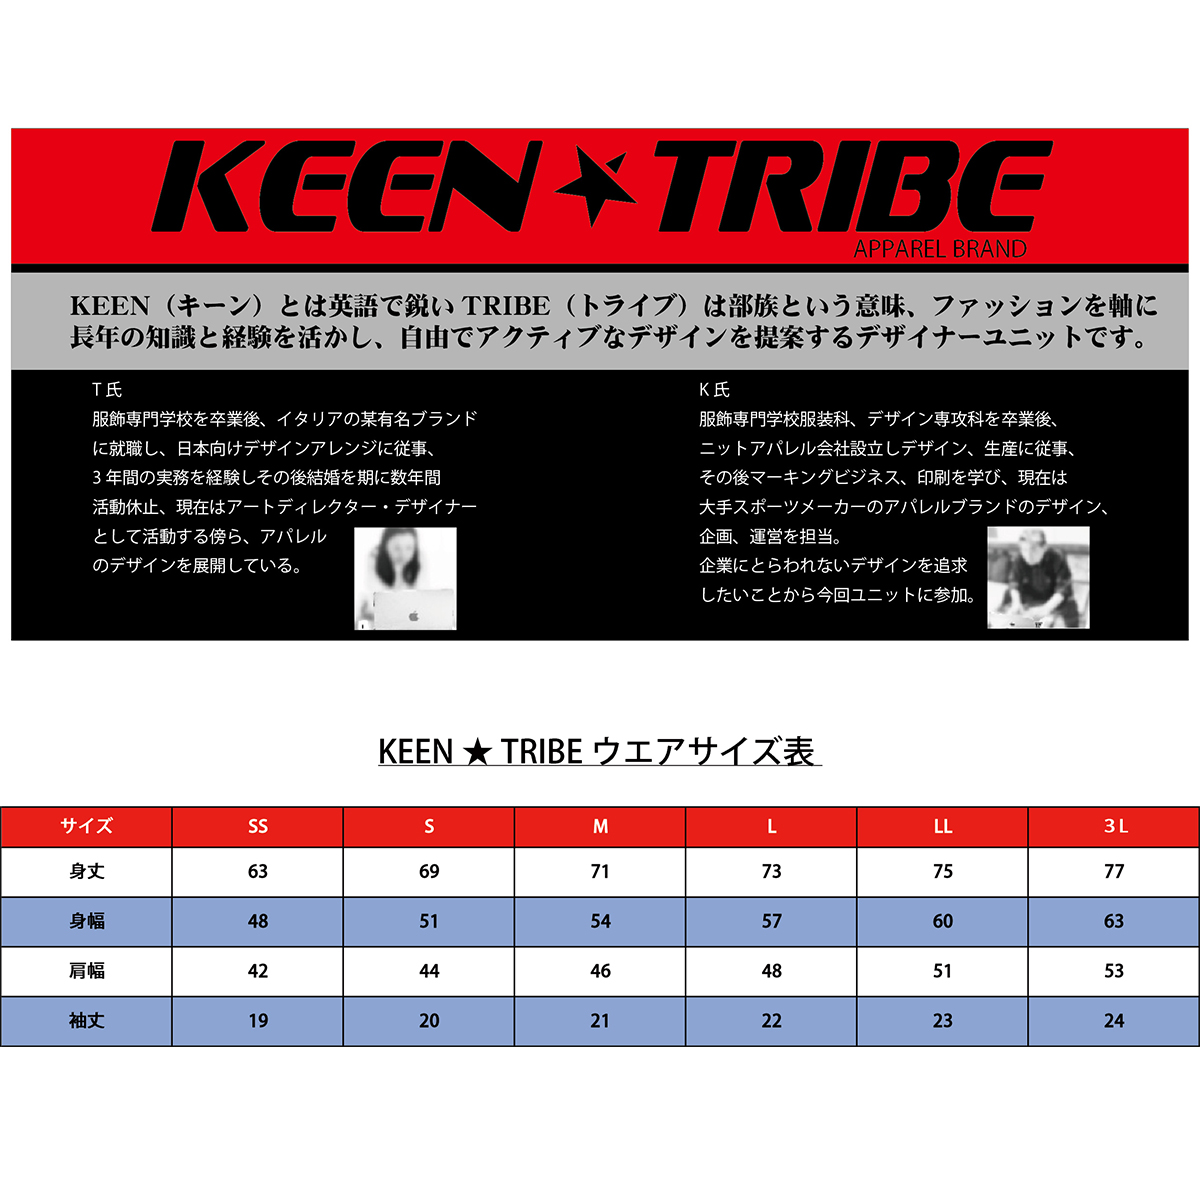 KEEN ★ TRIBE　KT-76(受注生産)